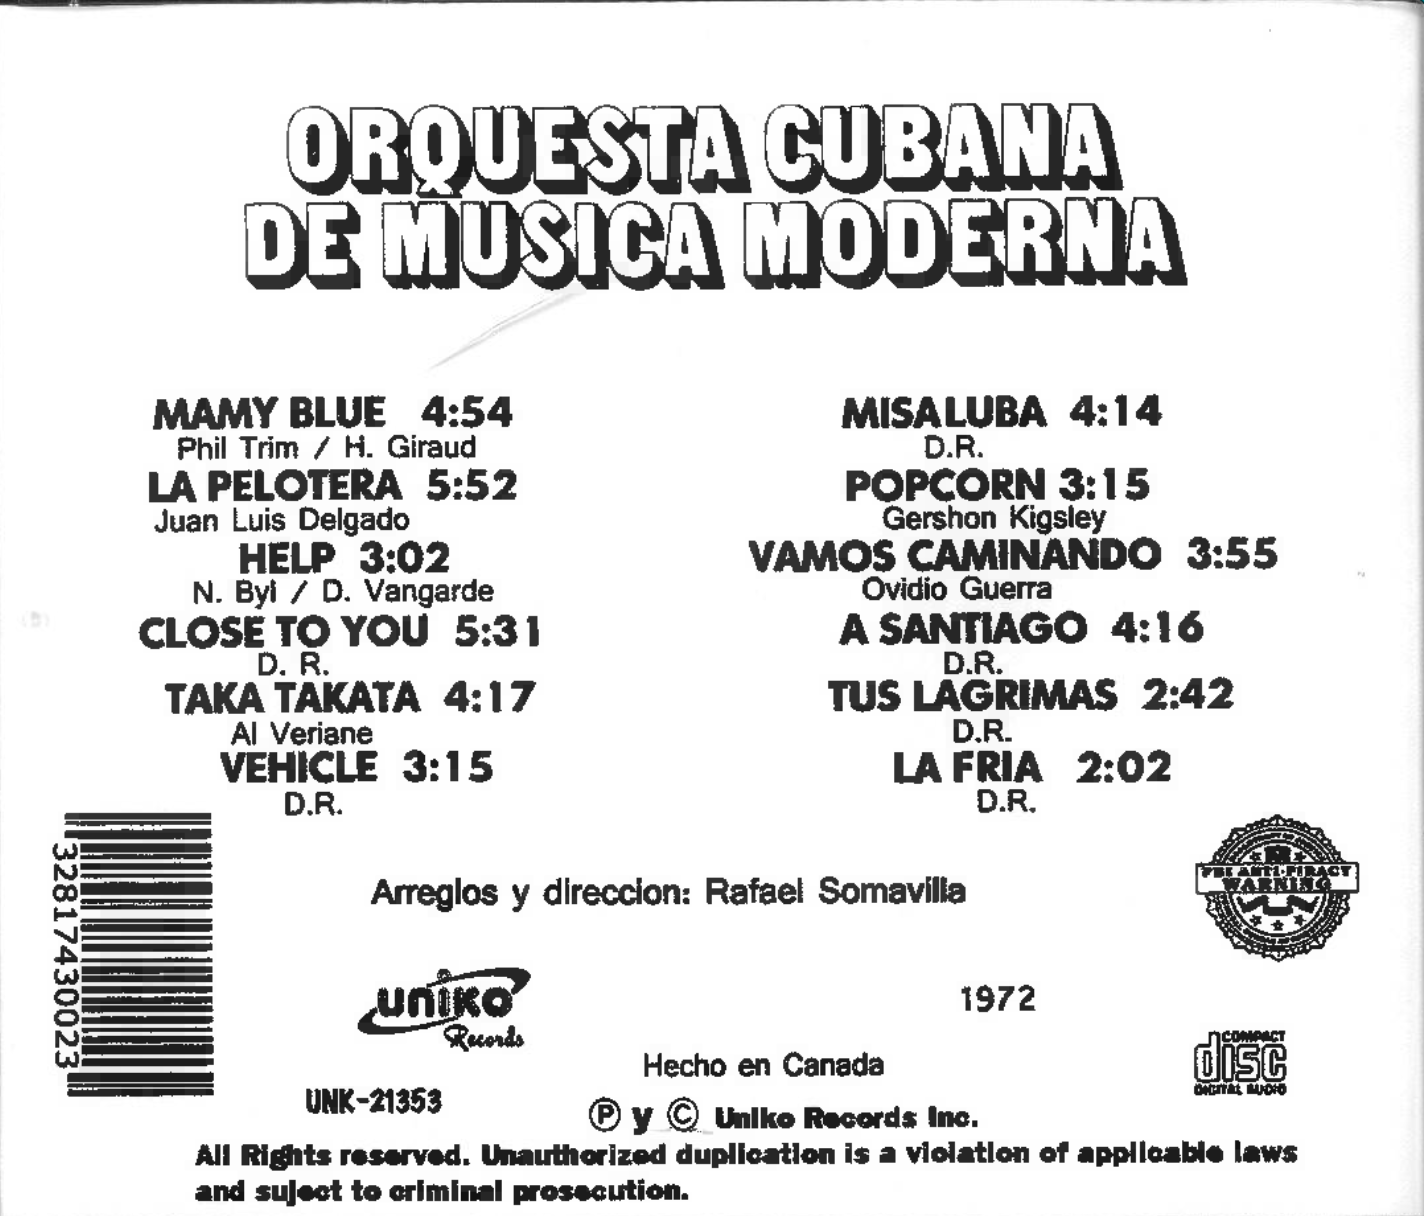 Back cover of the CD